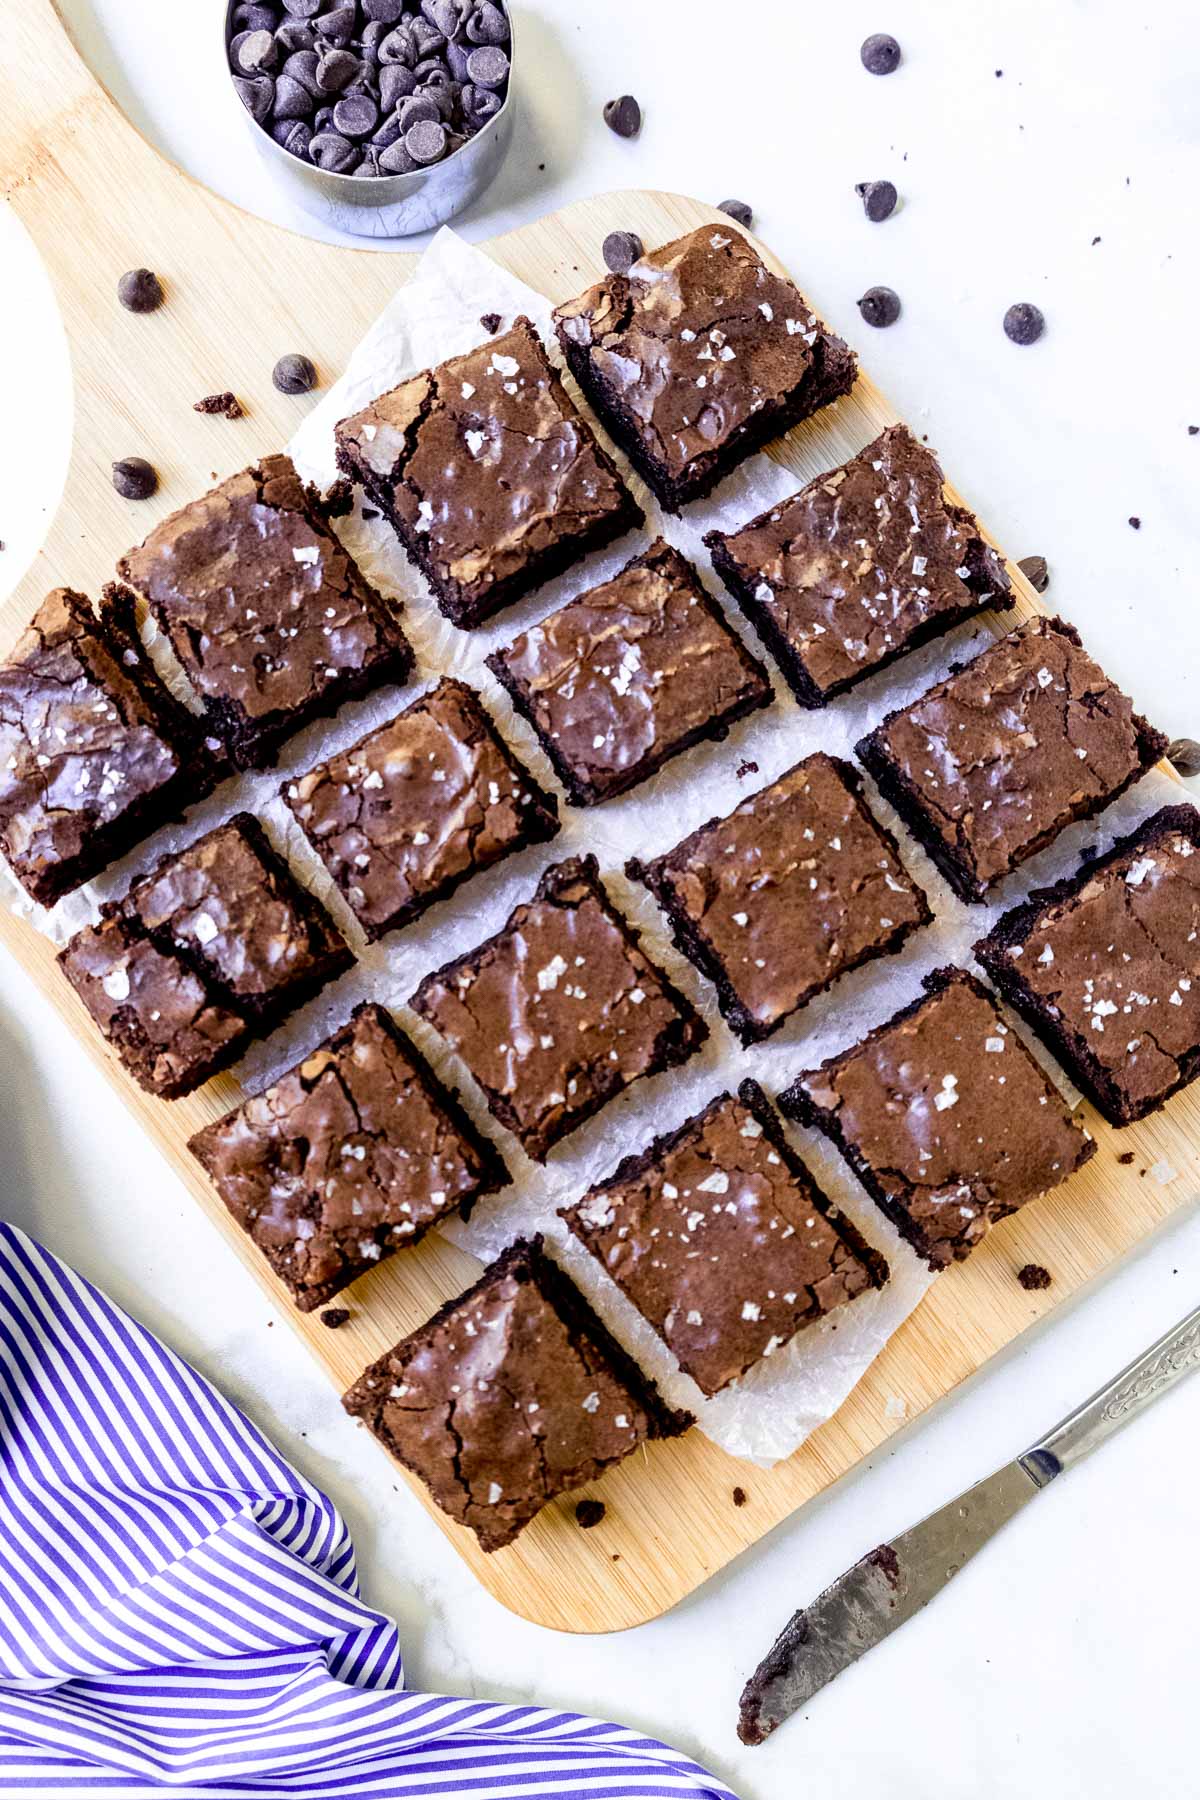 Brownies cut into squares with a blue and white striped linen.